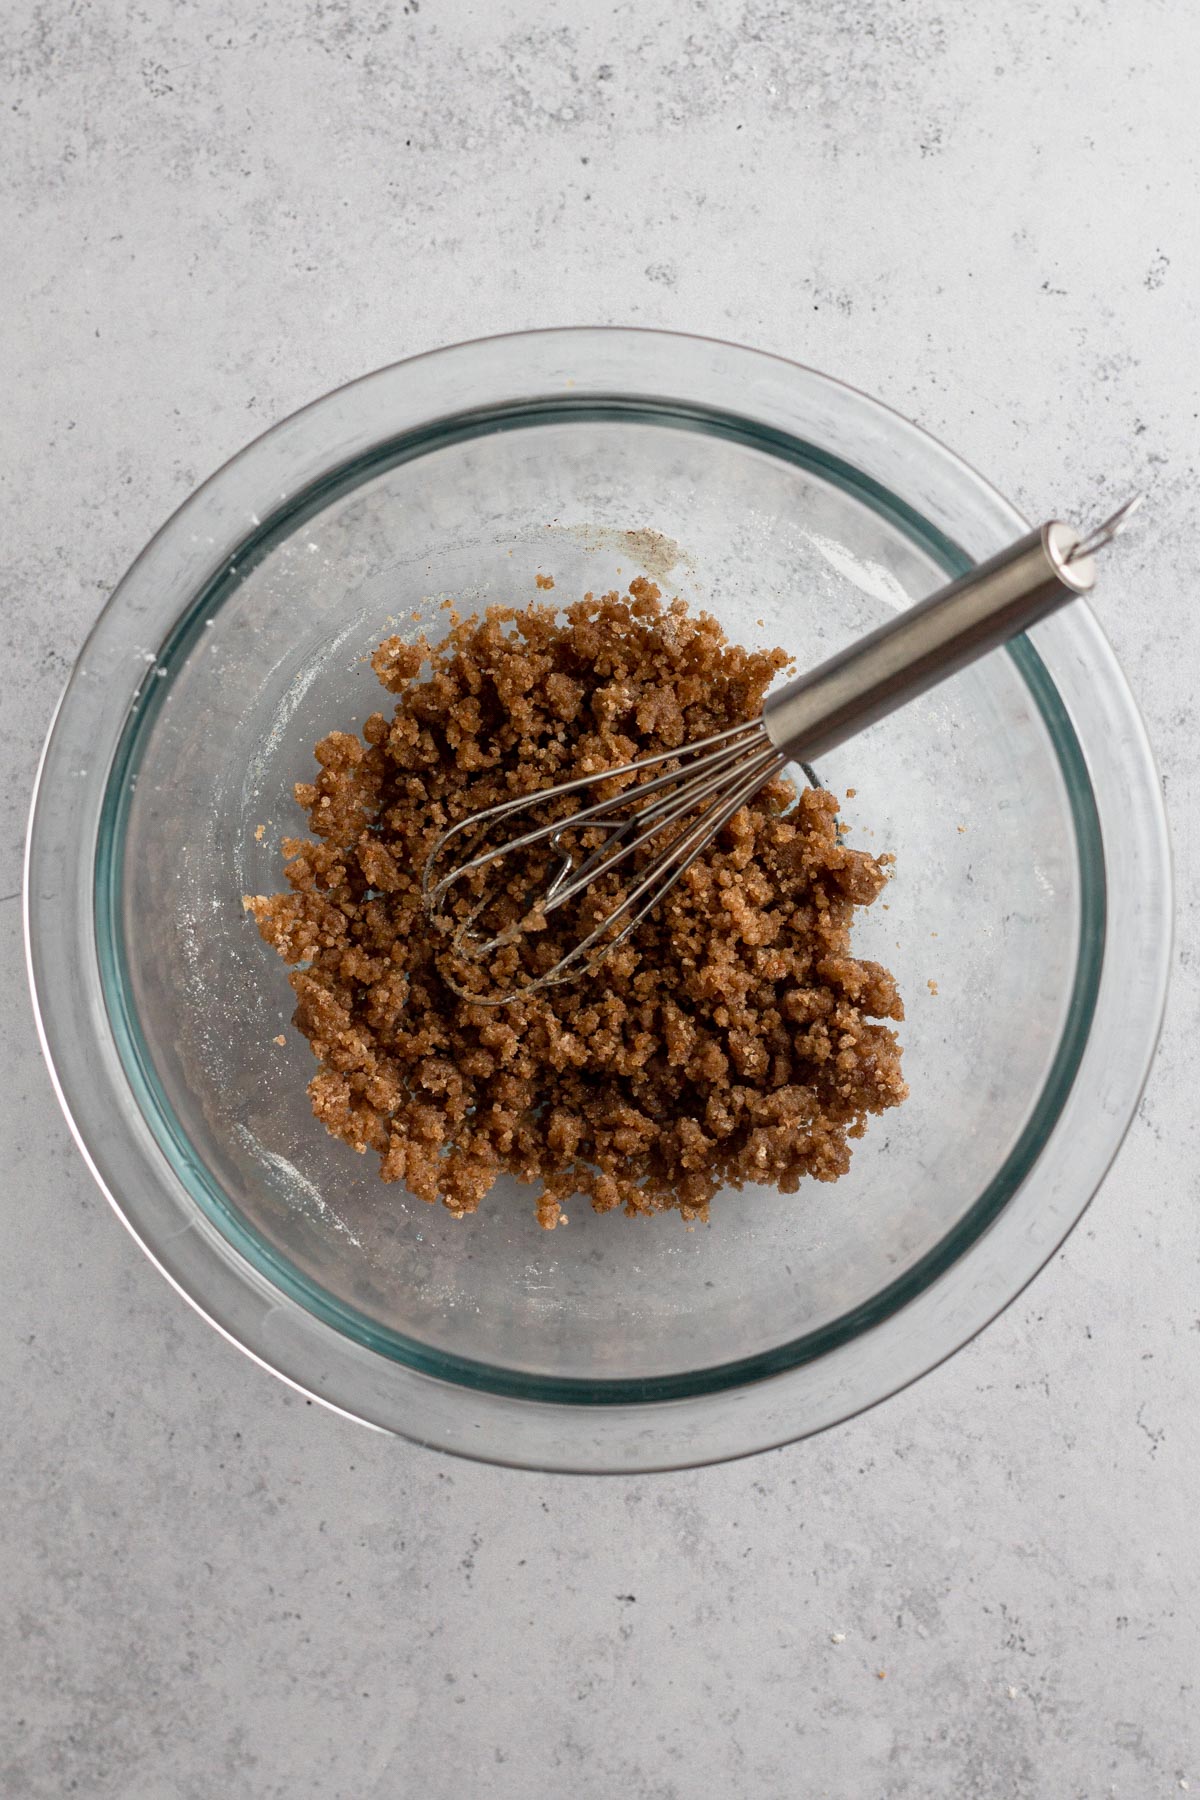 Overhead view of unbaked streusel in a glass bowl.